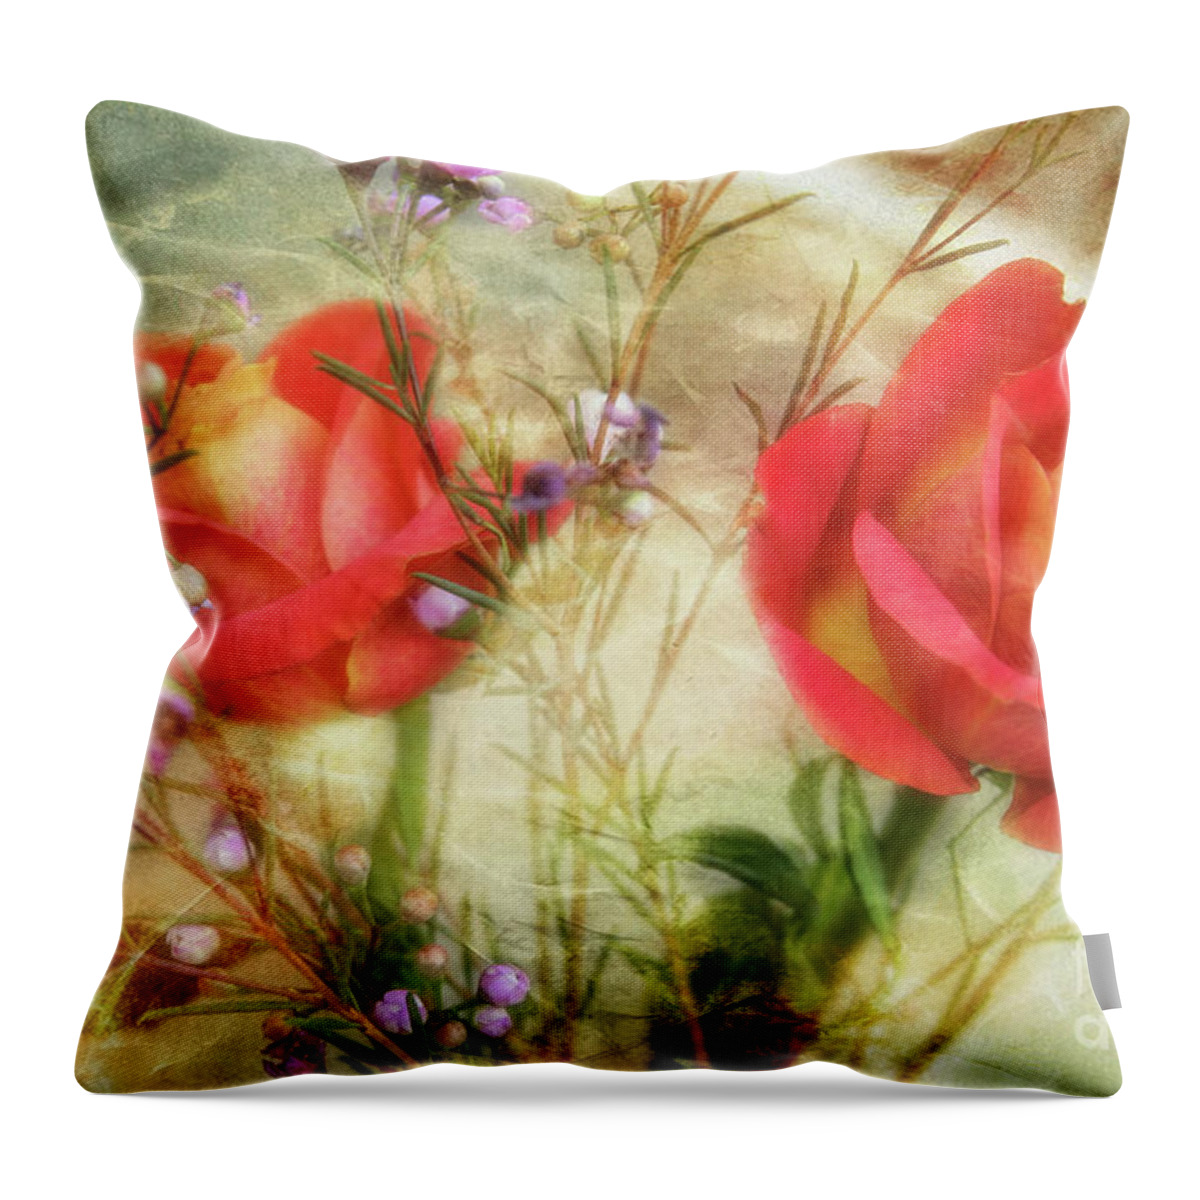 Roses Throw Pillow featuring the photograph A Treasure by Joan Bertucci